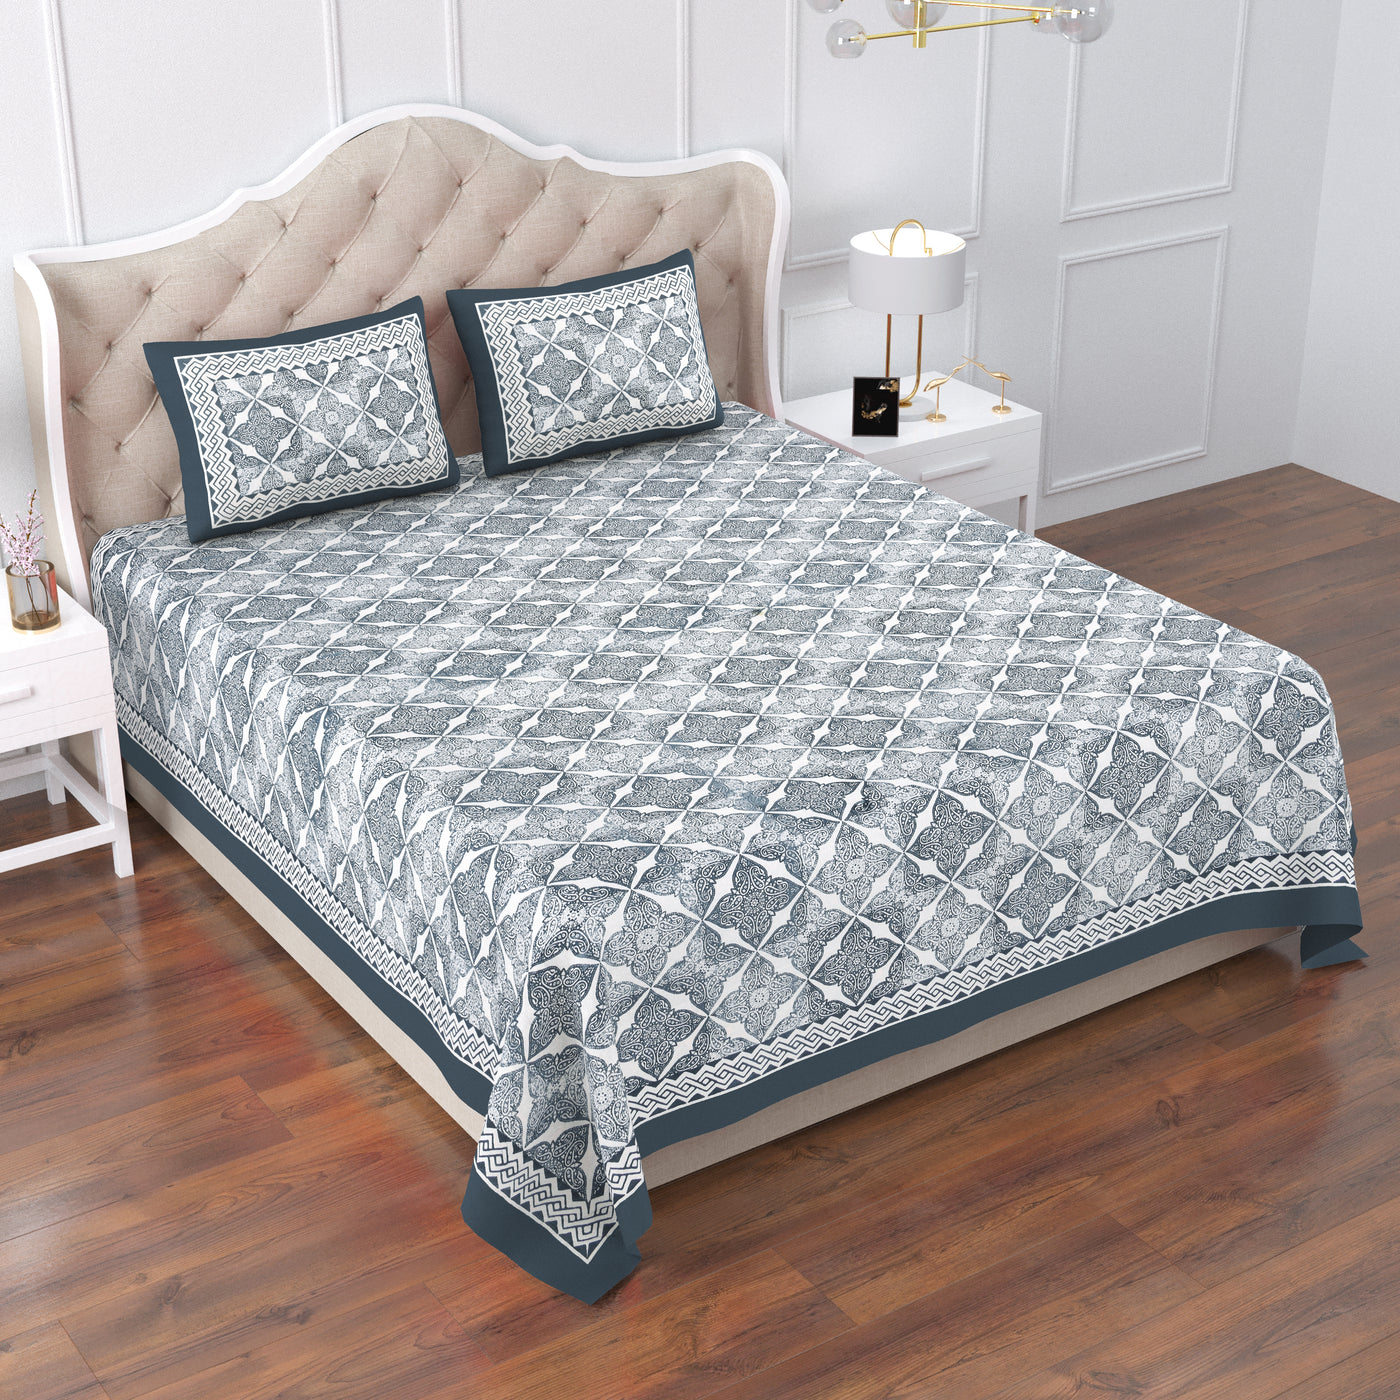 Teal Blue Cotton Printed Double Bed Sheet With 2 Pillow Covers